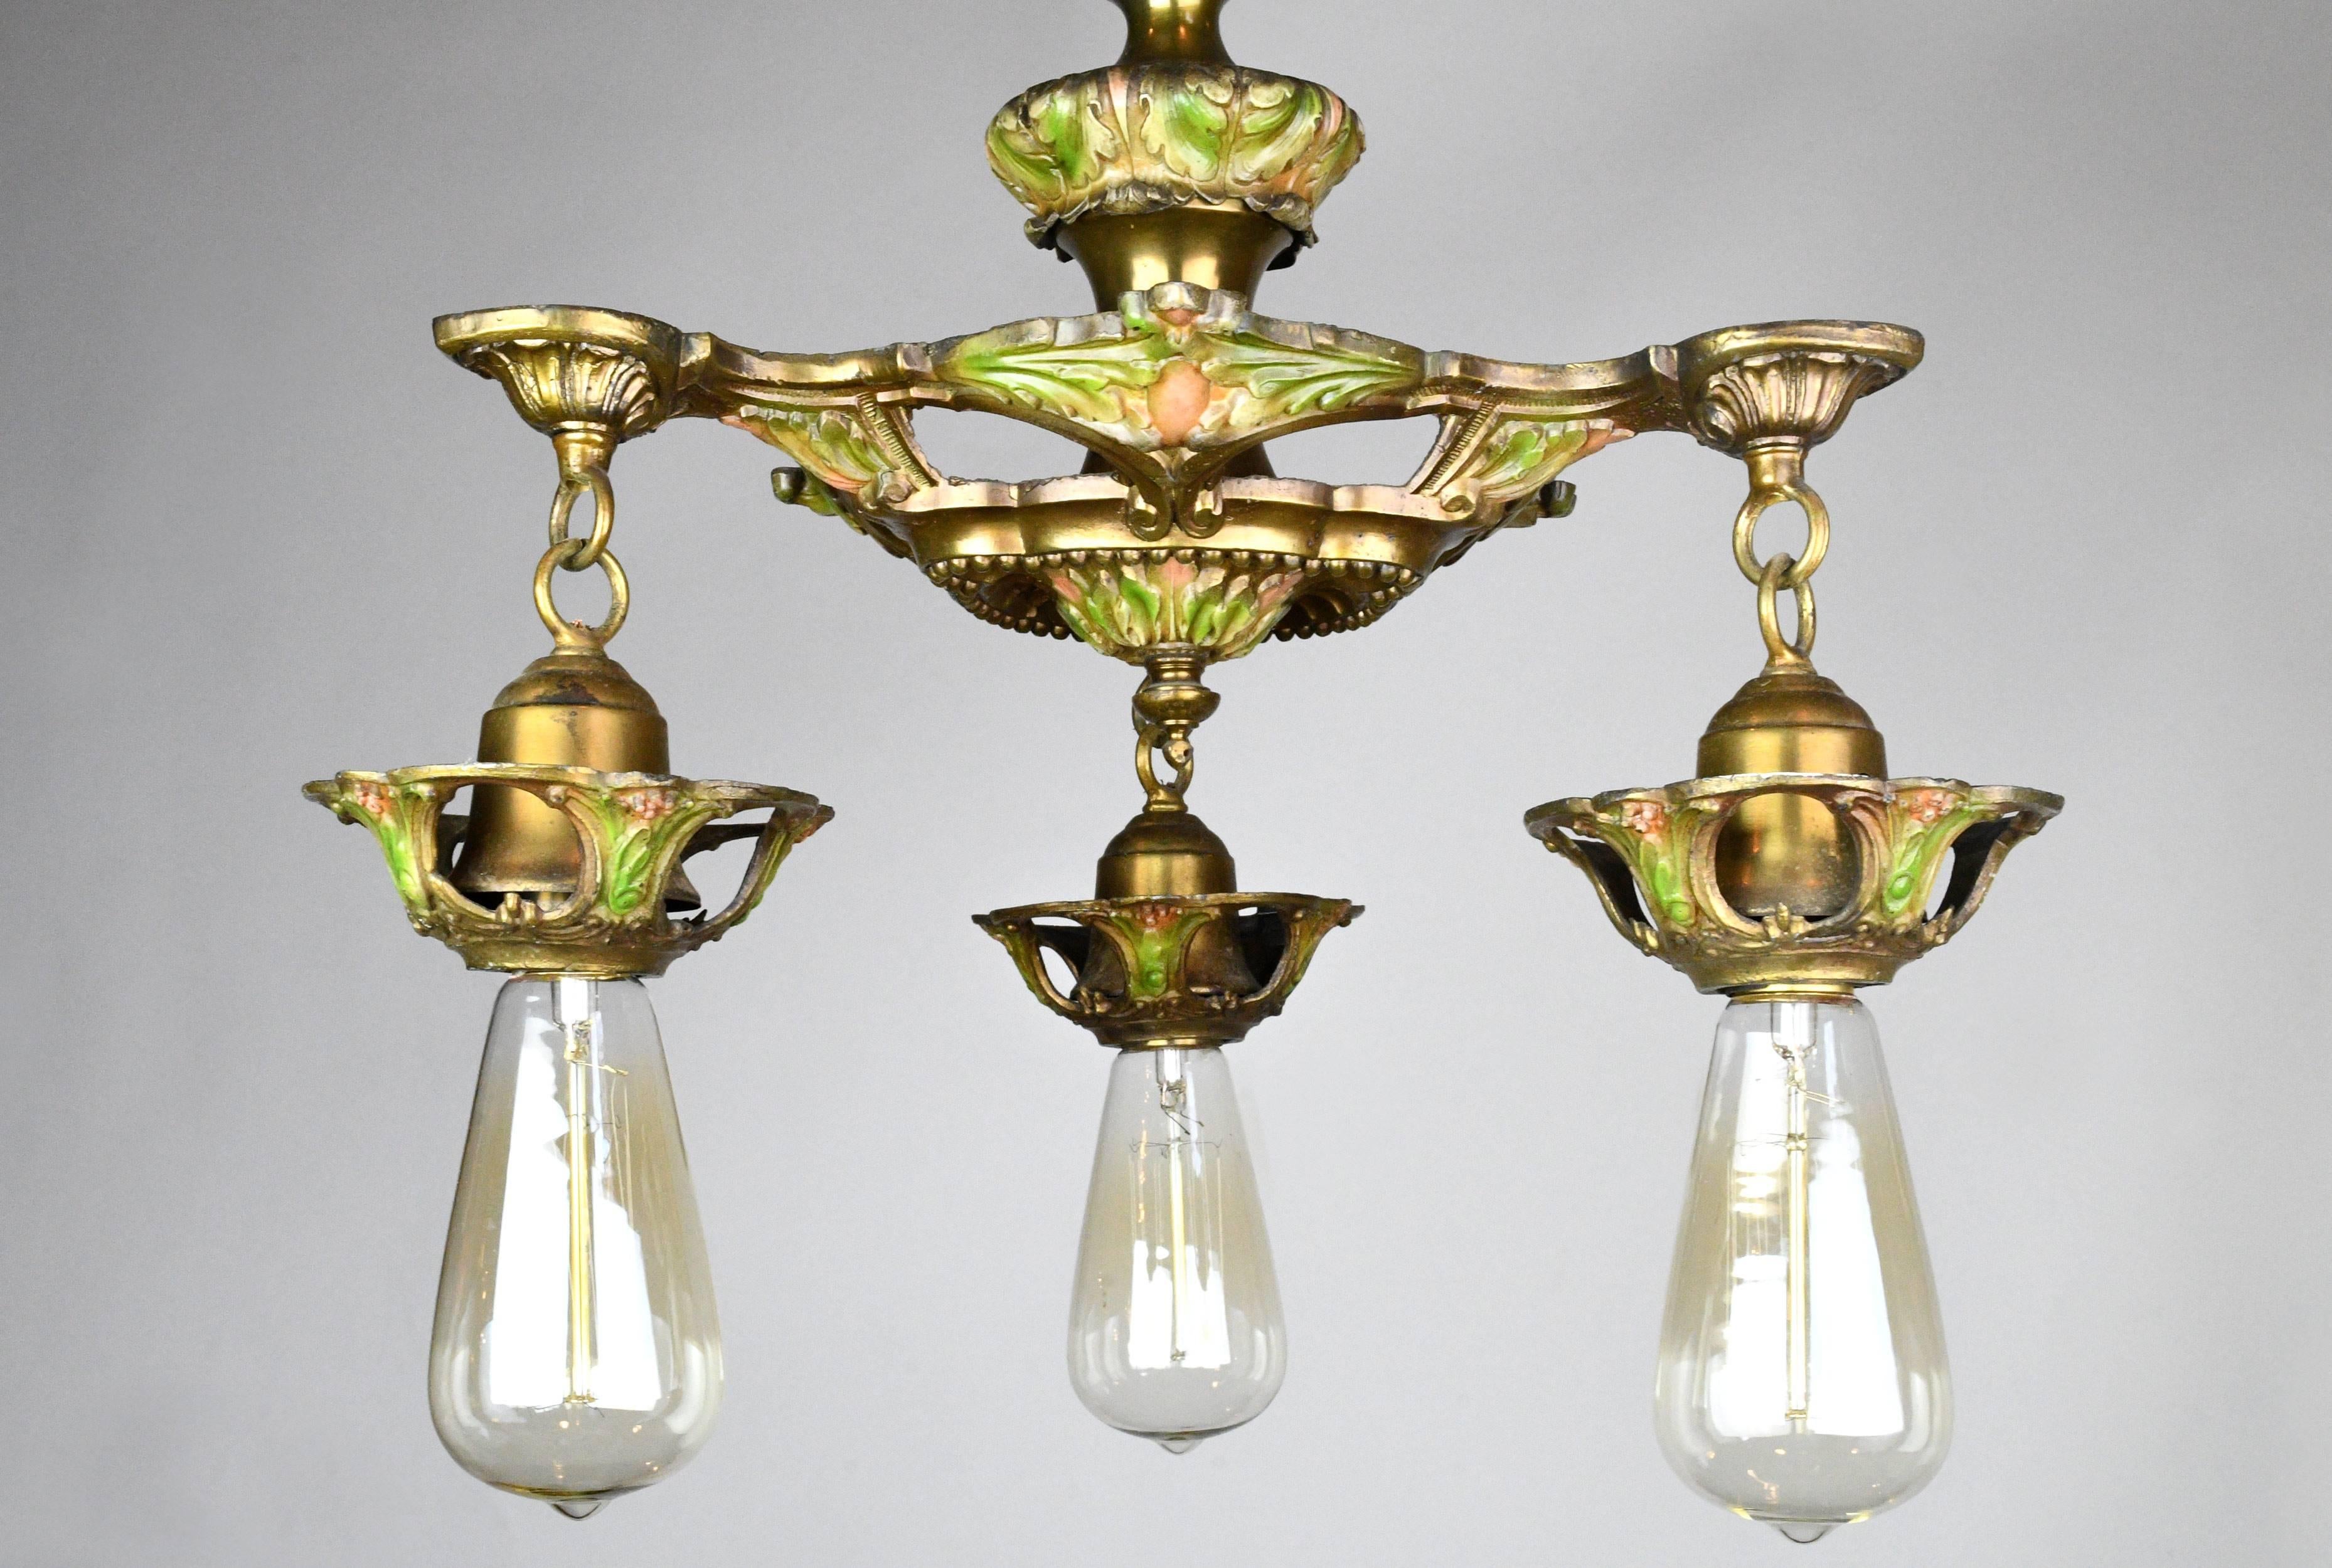 Yellow and rose colored painted details adorn this intricately detailed three-light lead chandelier. Pair with Edison bulbs for a look that's aged to perfection.

We find that early antique lighting was designed as objects of art and we treat each